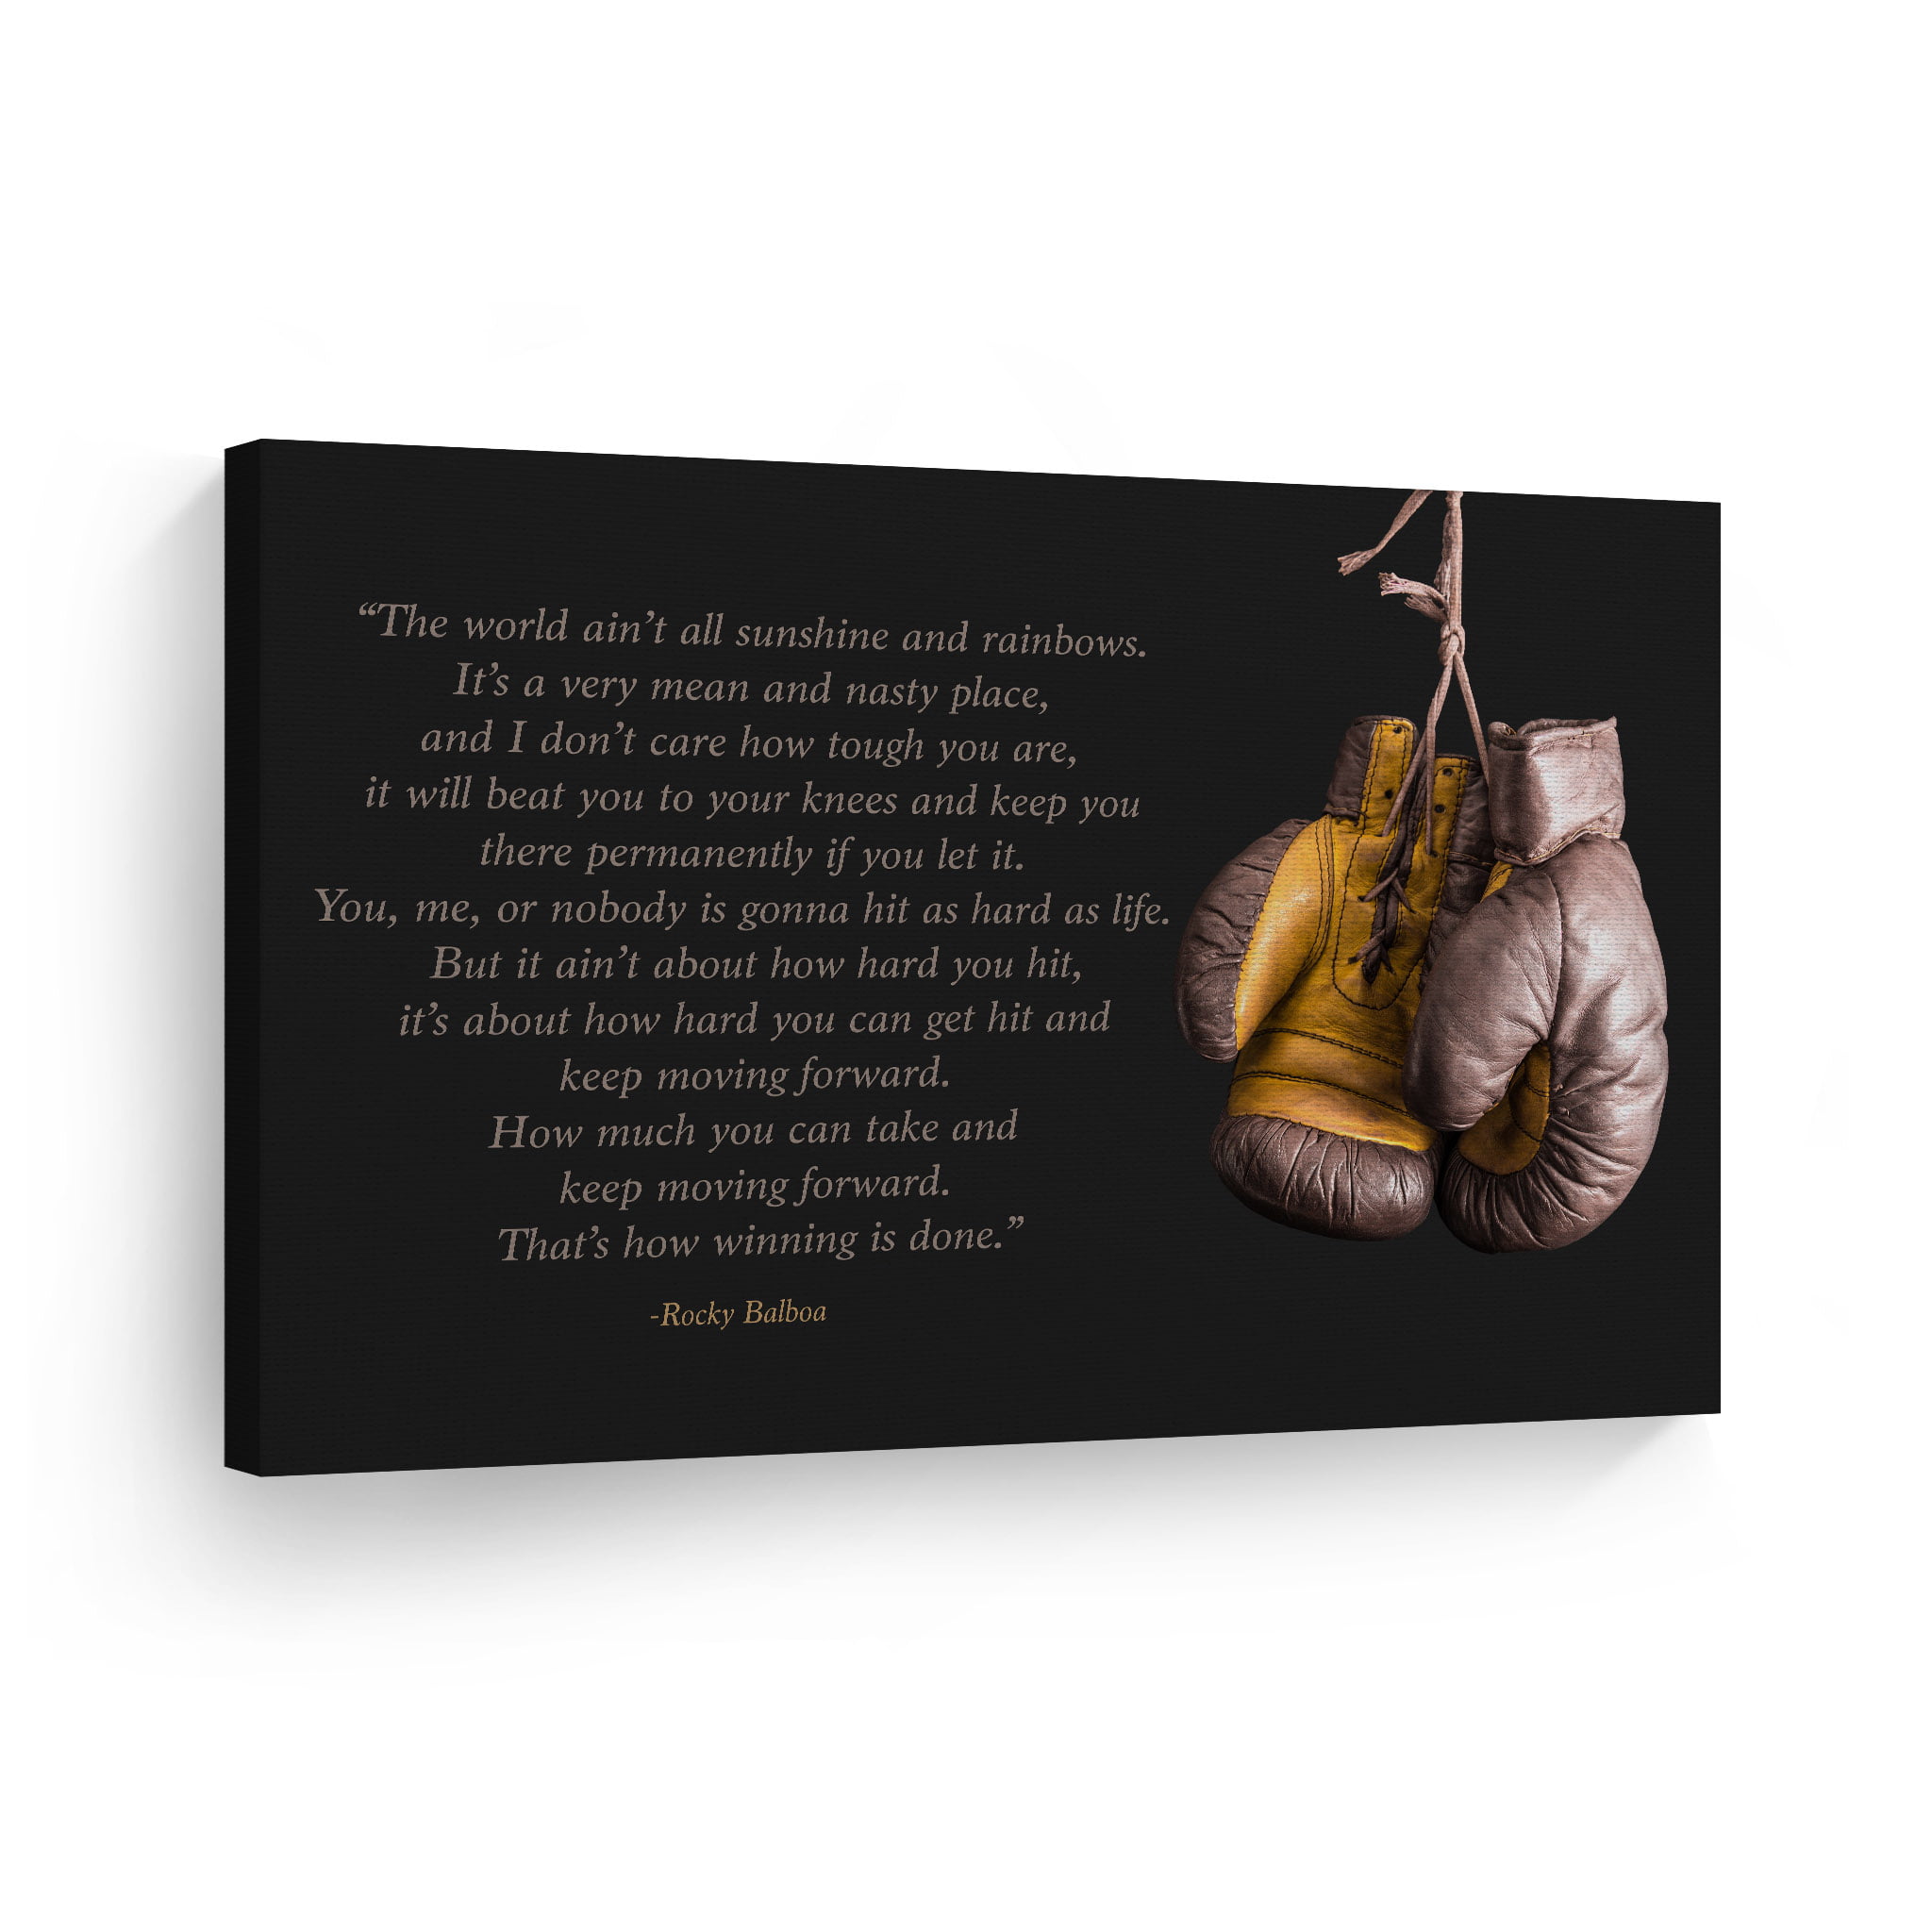 AWESOMETIK Rocky Balboa Collection Quote Canvas Print 24in x 18in Modern Black Framed, Rocky Balboa 5 Motivational Quote Wall Art Ready to Hang Made in USA 